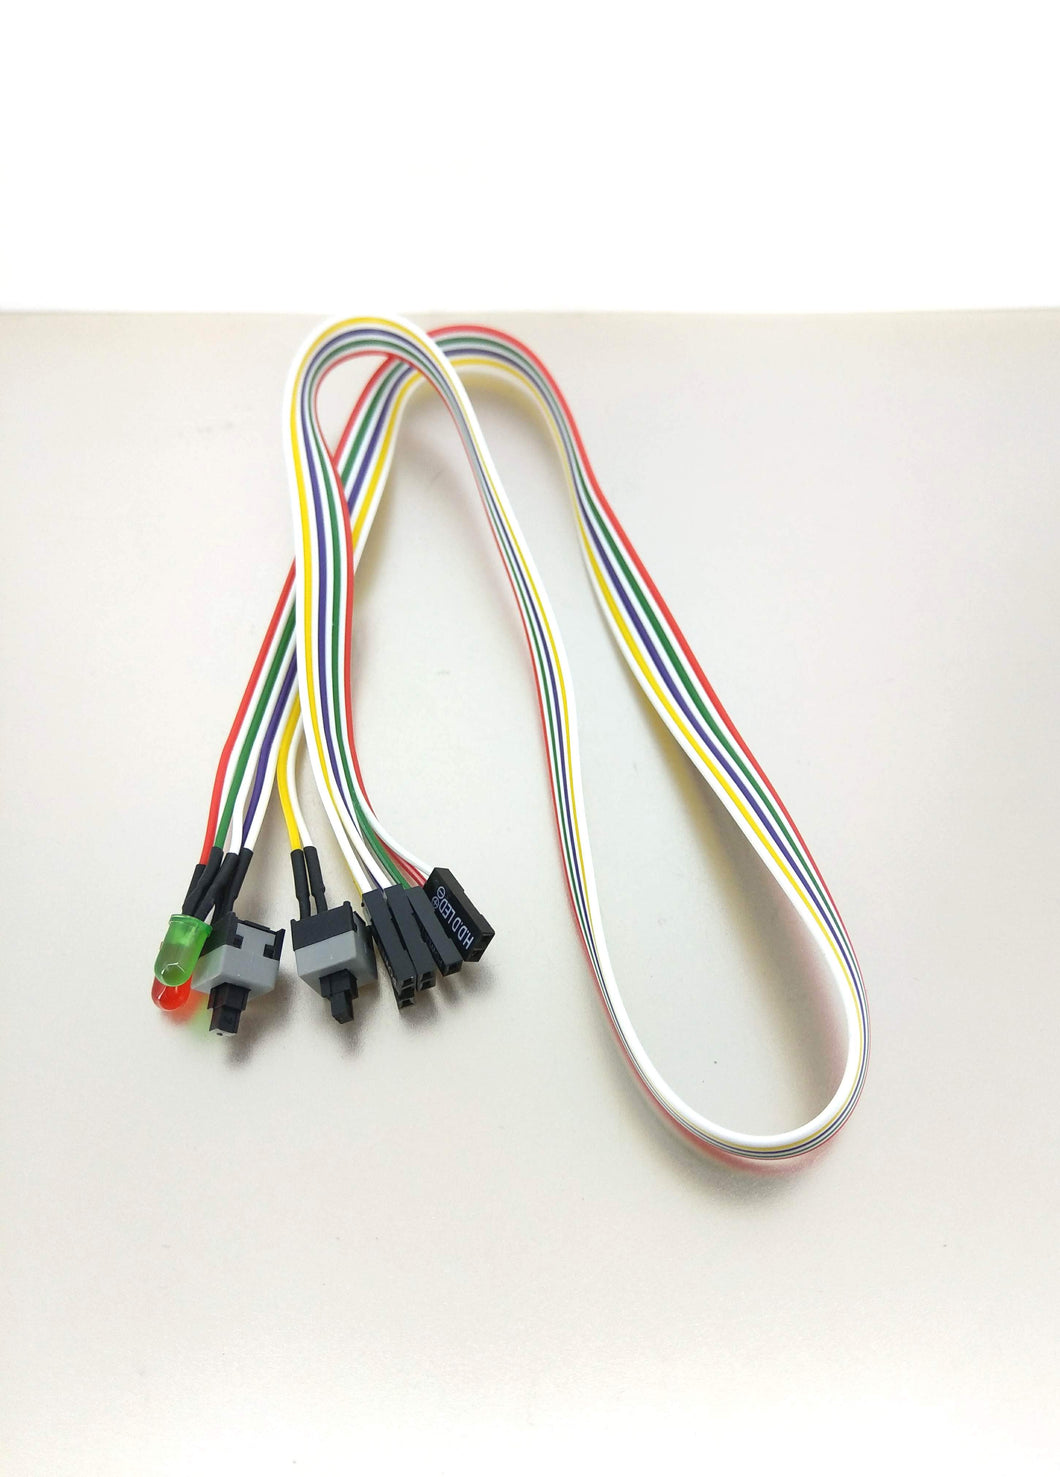 PC ATX Power Reset Switch Cable